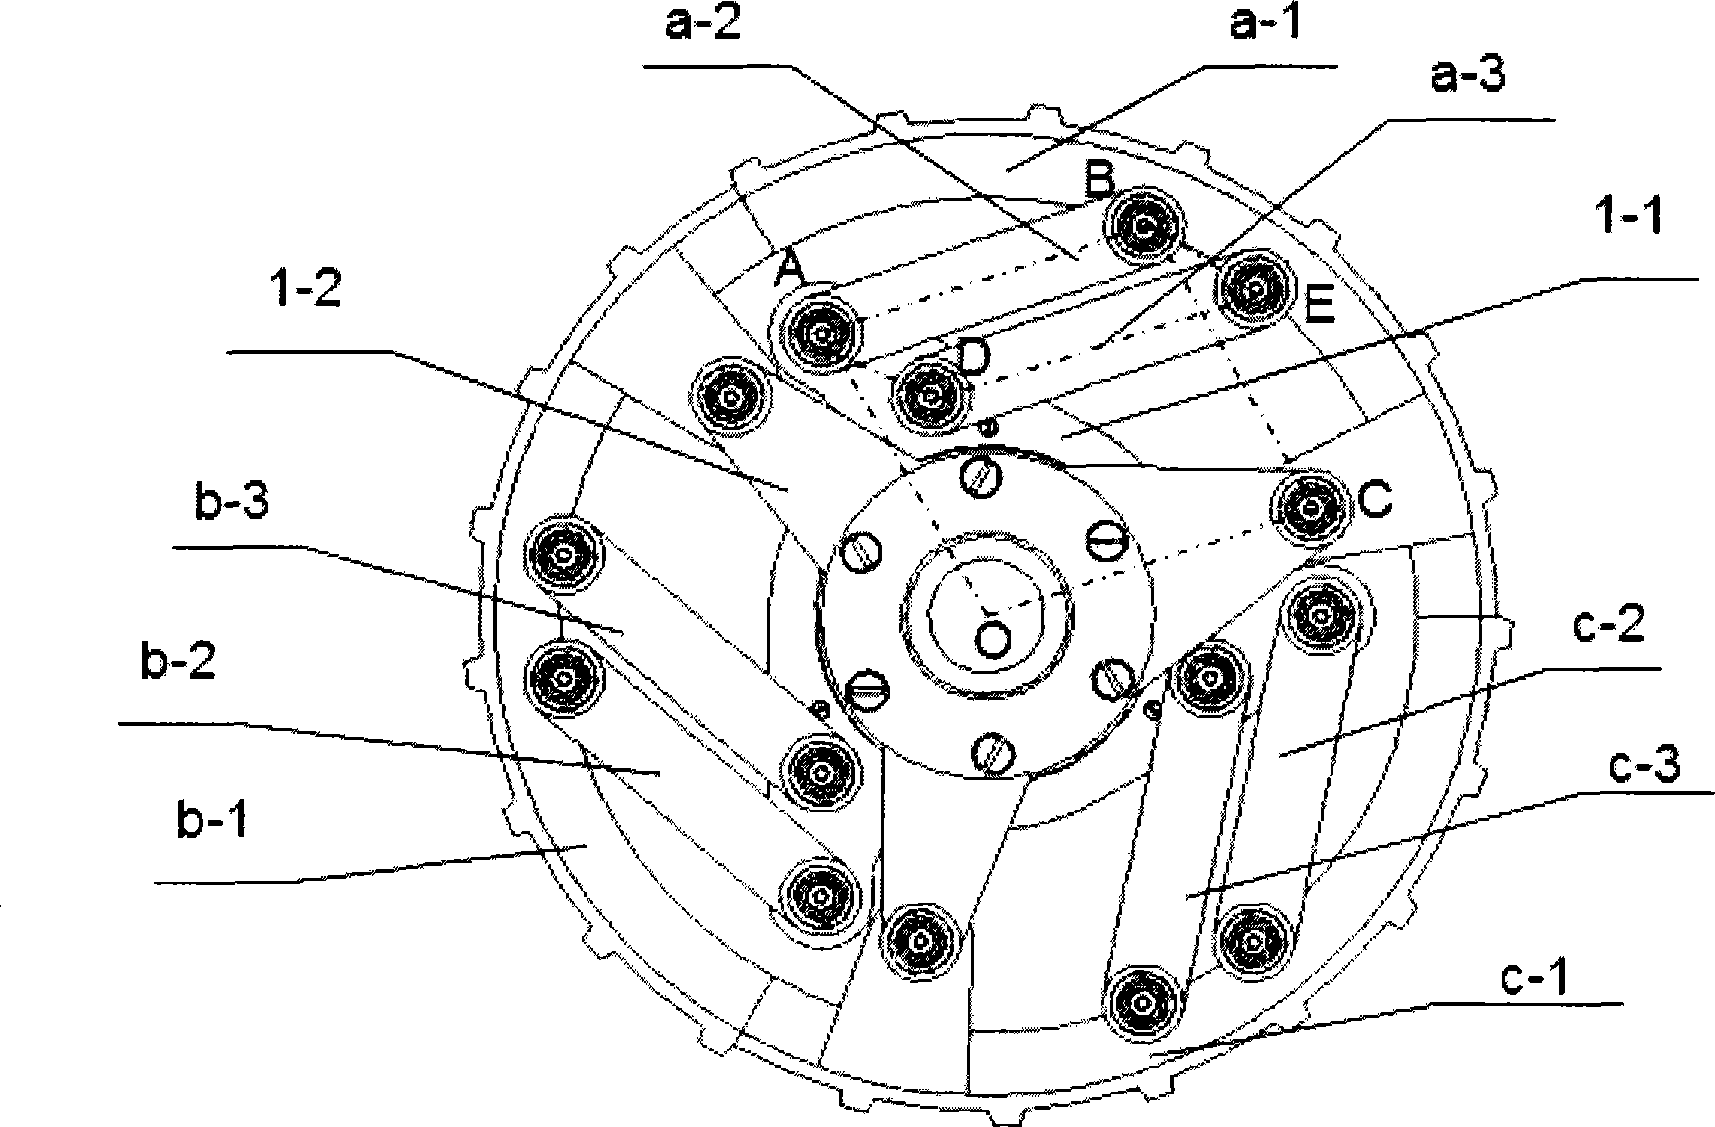 Portable moving device with wheel-leg hybrid advancing function